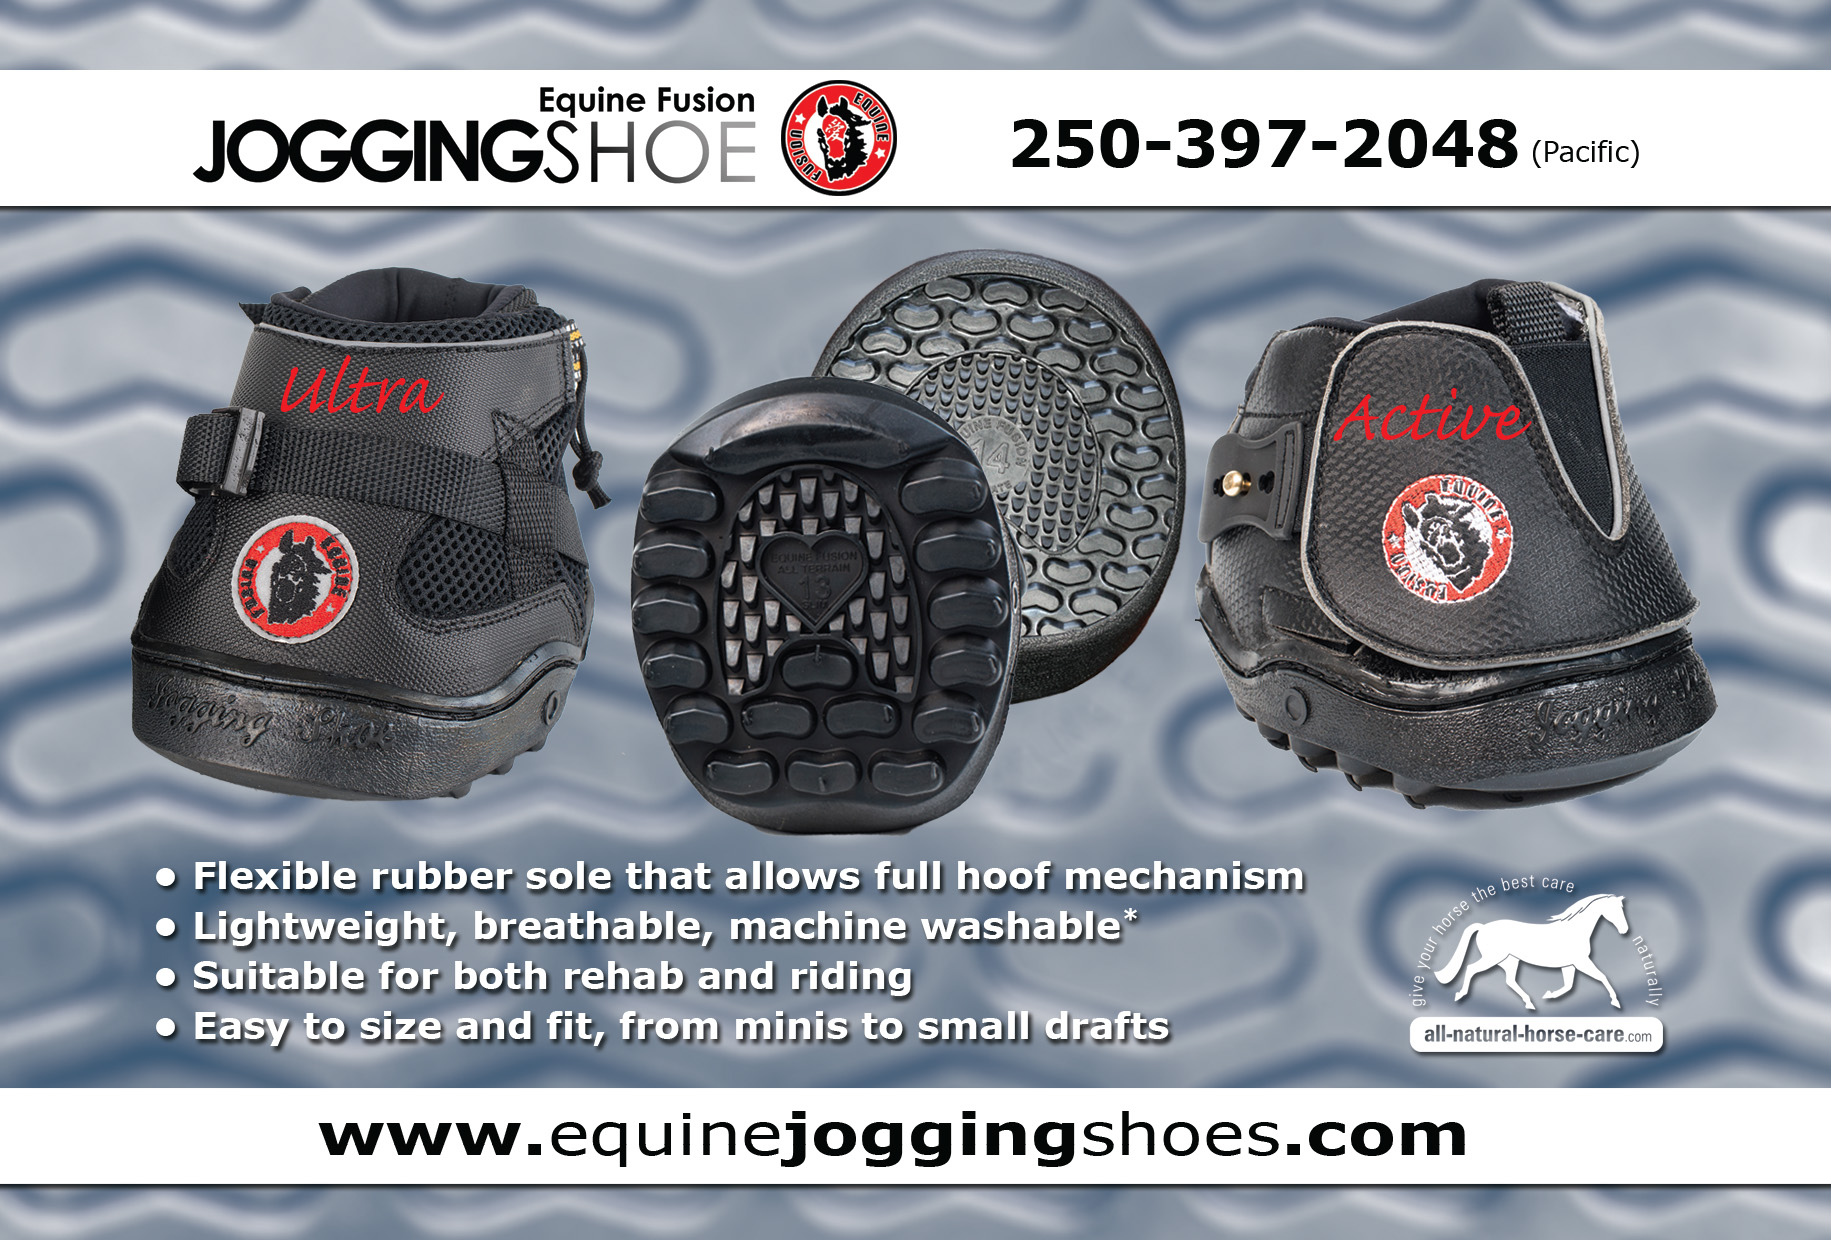 Equine Jogging Shoe - Now available in 